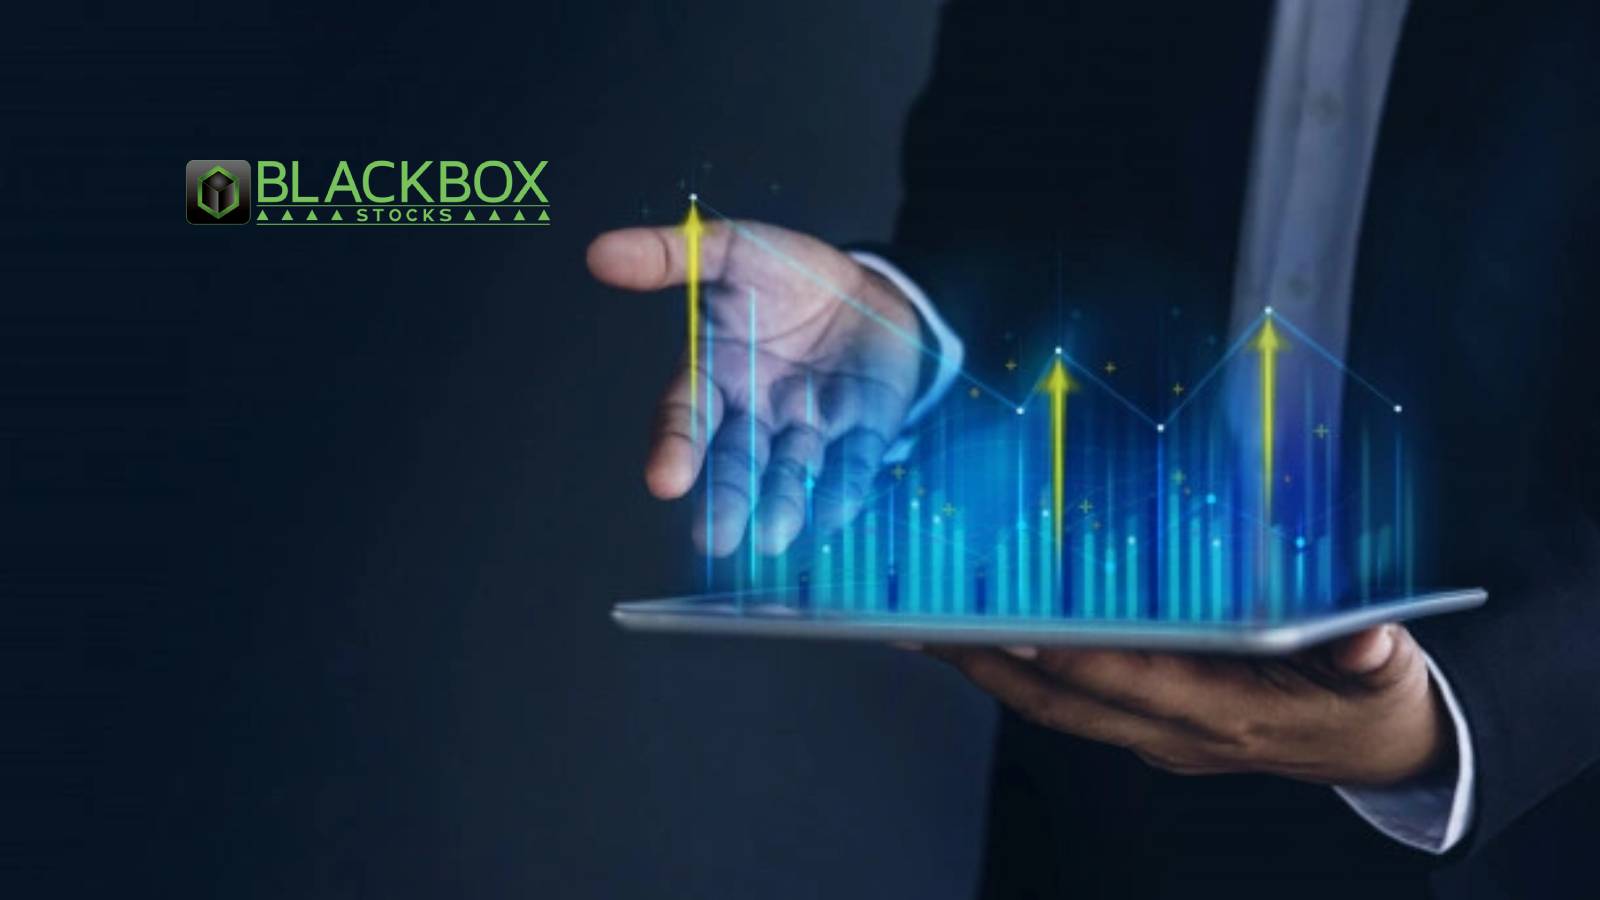 Blackboxstocks, Inc. To Acquire Evtec Aluminum, Paves Pathway To An Accretive $52 Million In Revenues From Serving EV, Hybrid, and Performance Auto Markets ($BLBX)